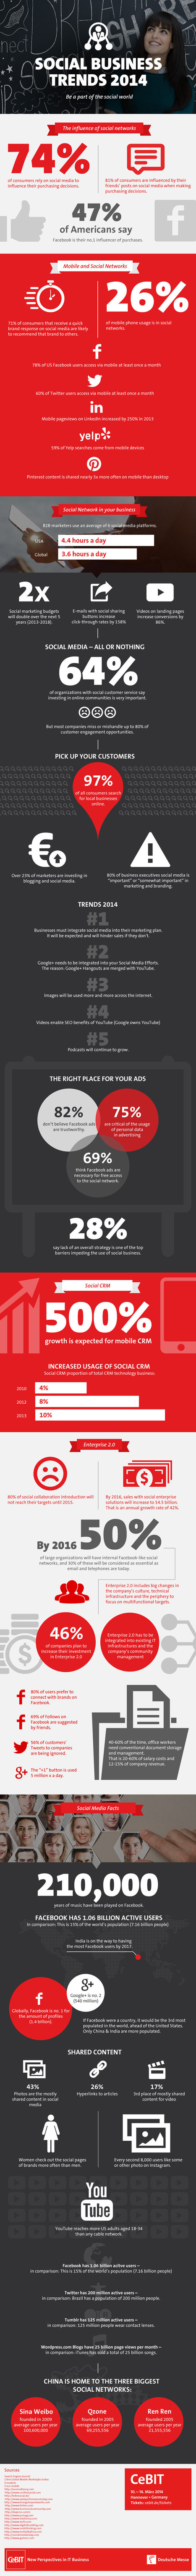 Social Business Trends 2014 [INFOGRAPHIC] | Startup Revolution | Scoop.it